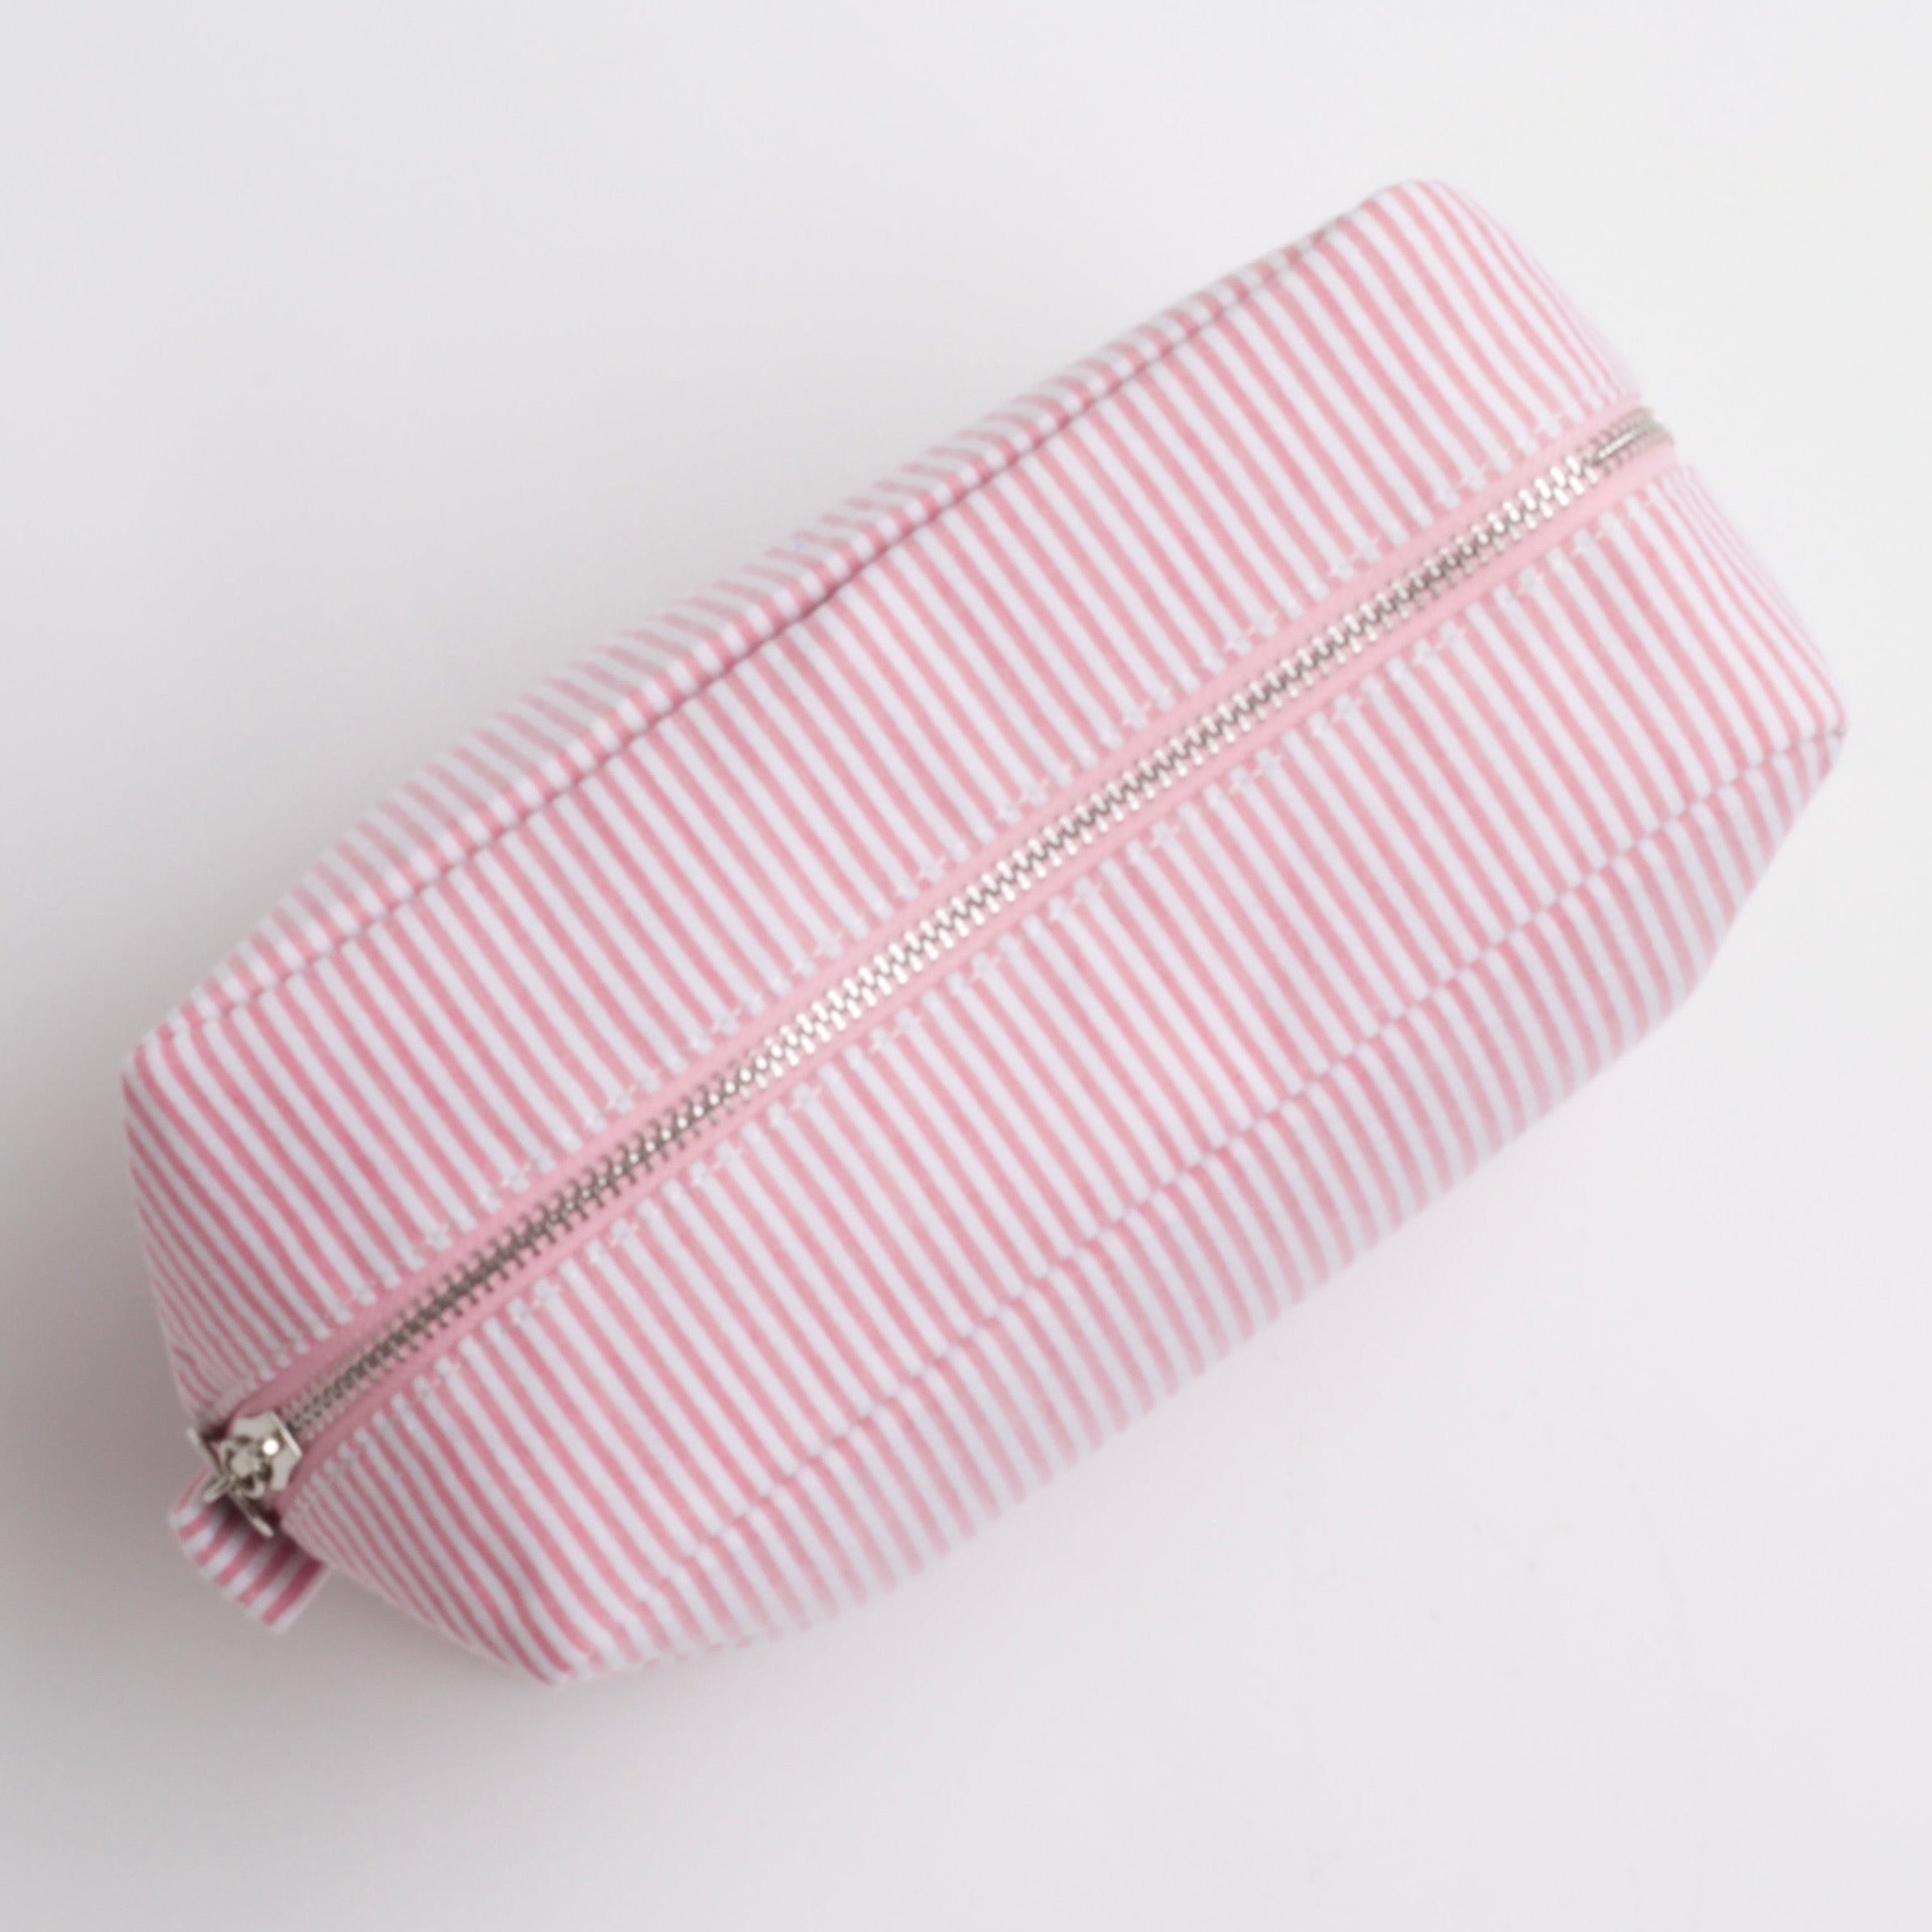 Top view of pink striped bag